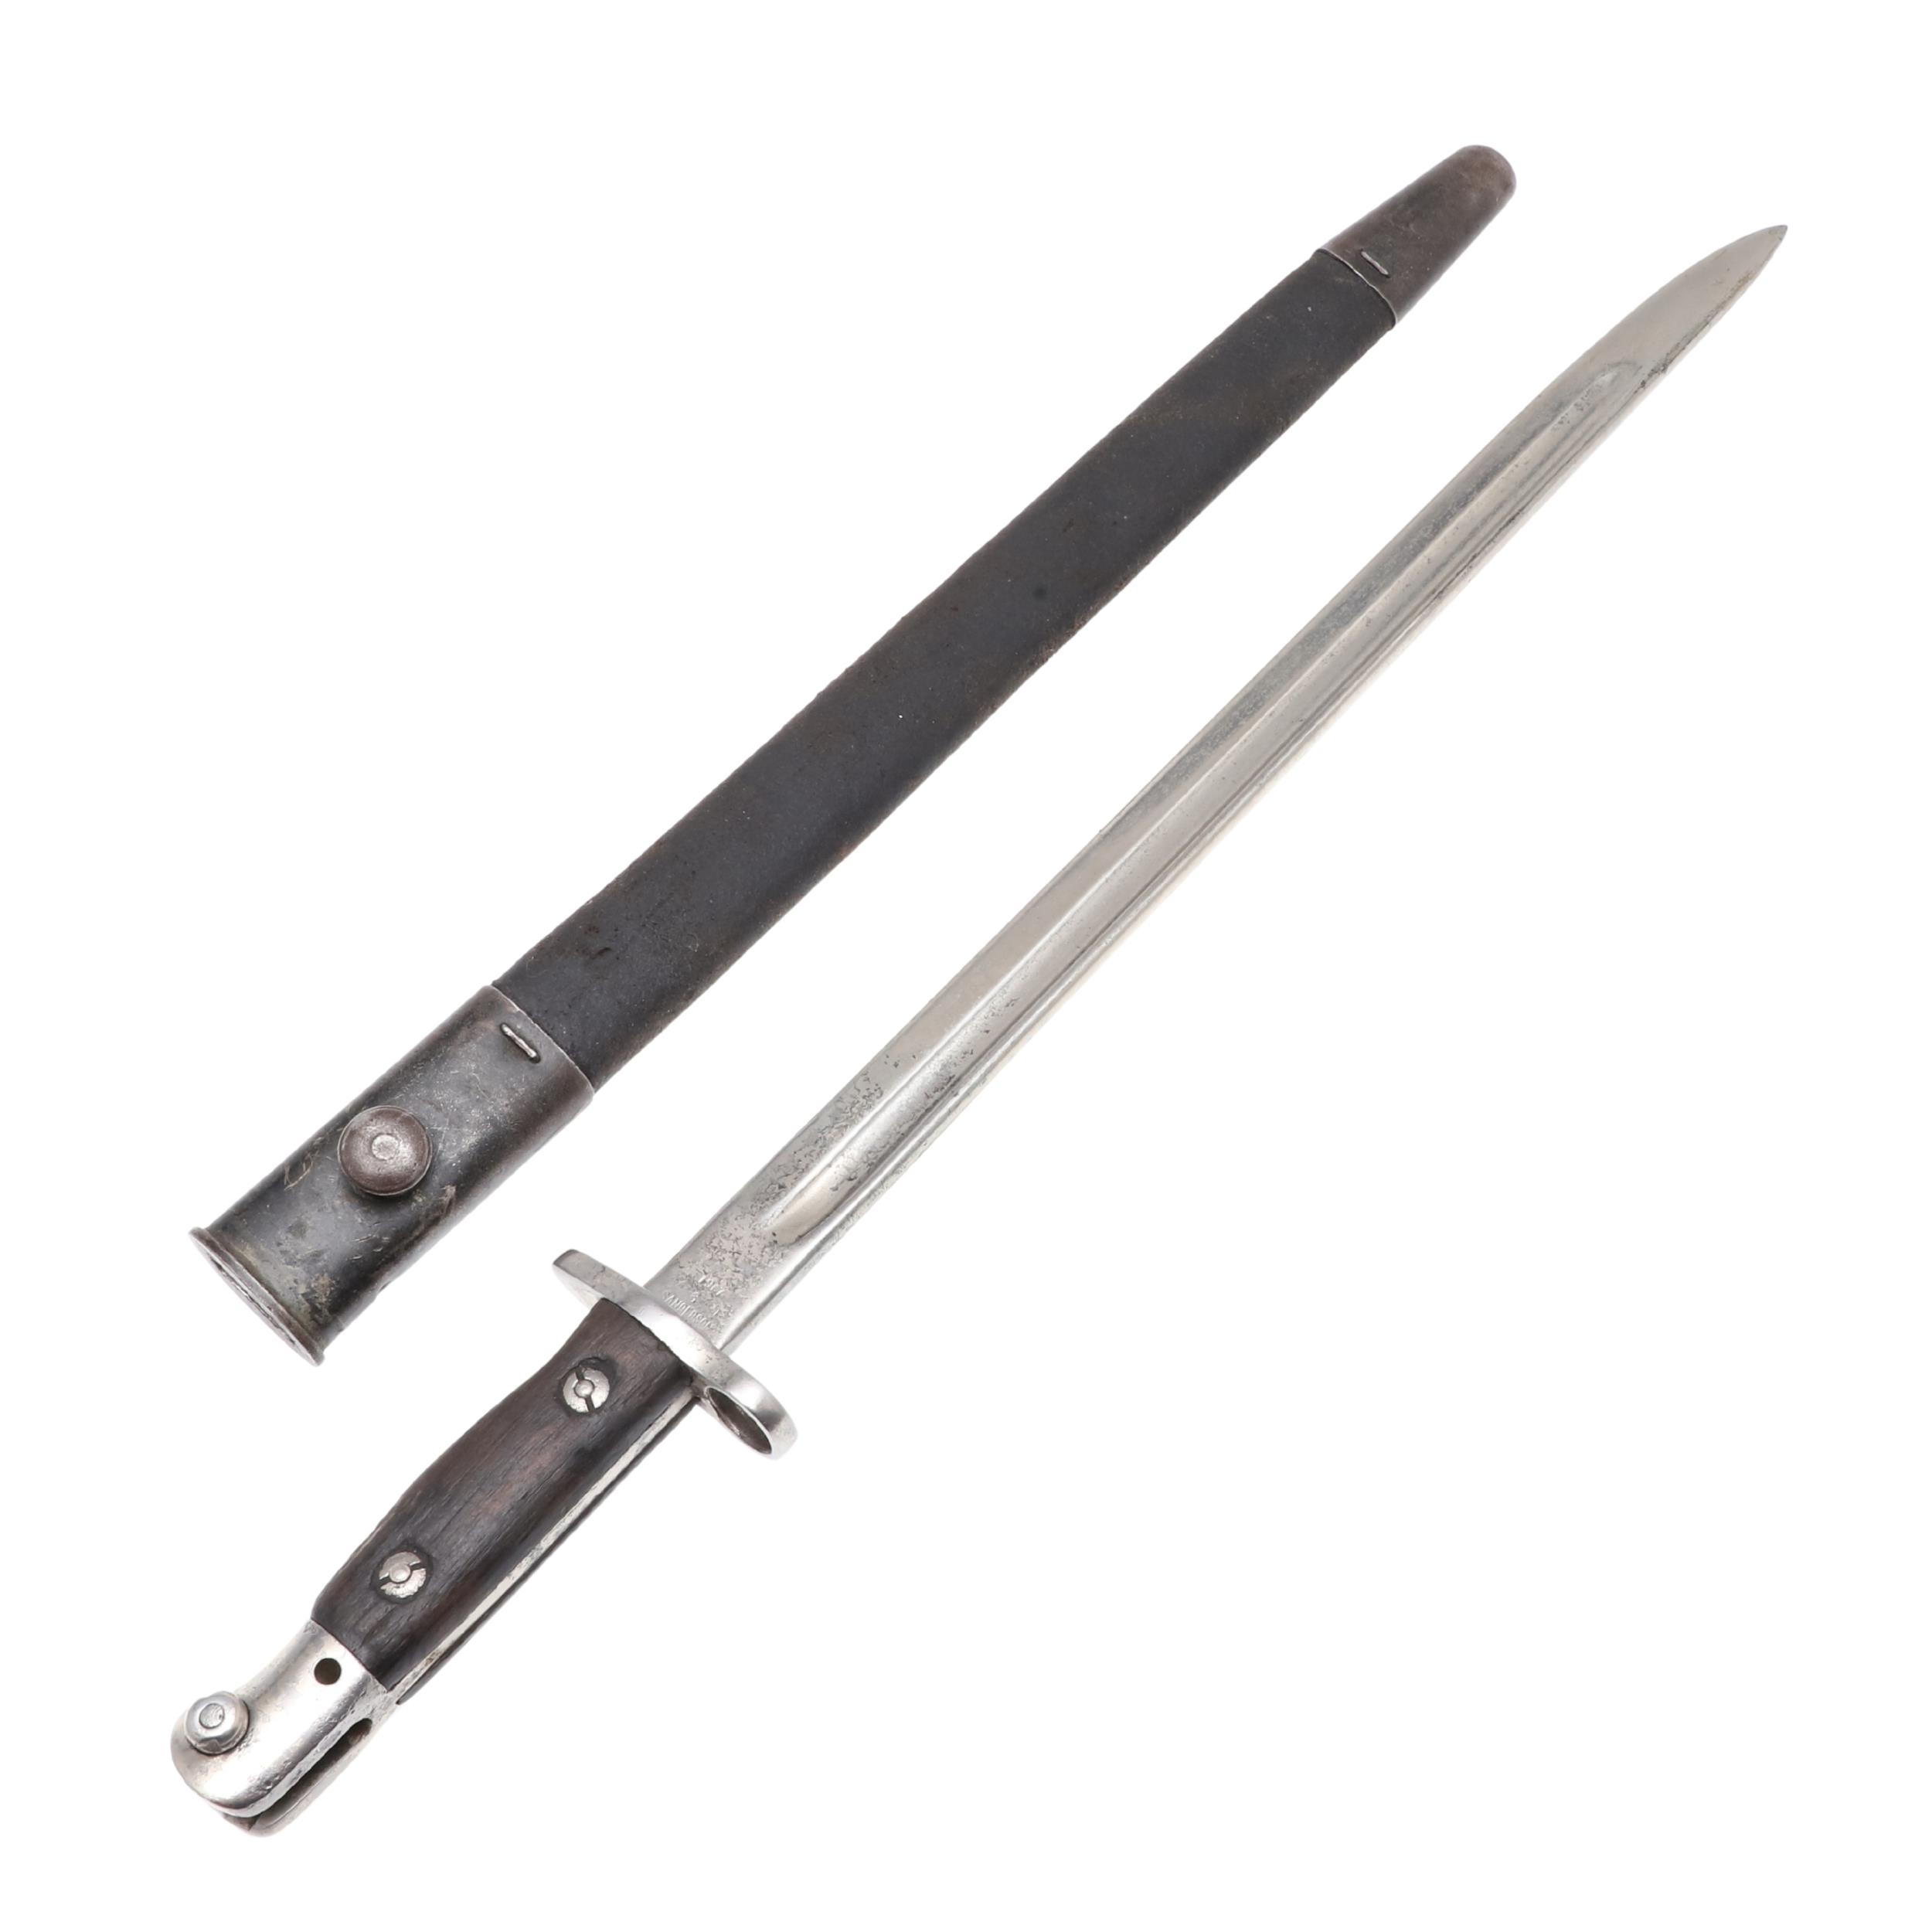 A 1907 PATTERN BAYONET AND SCABBARD BY SANDERSON.